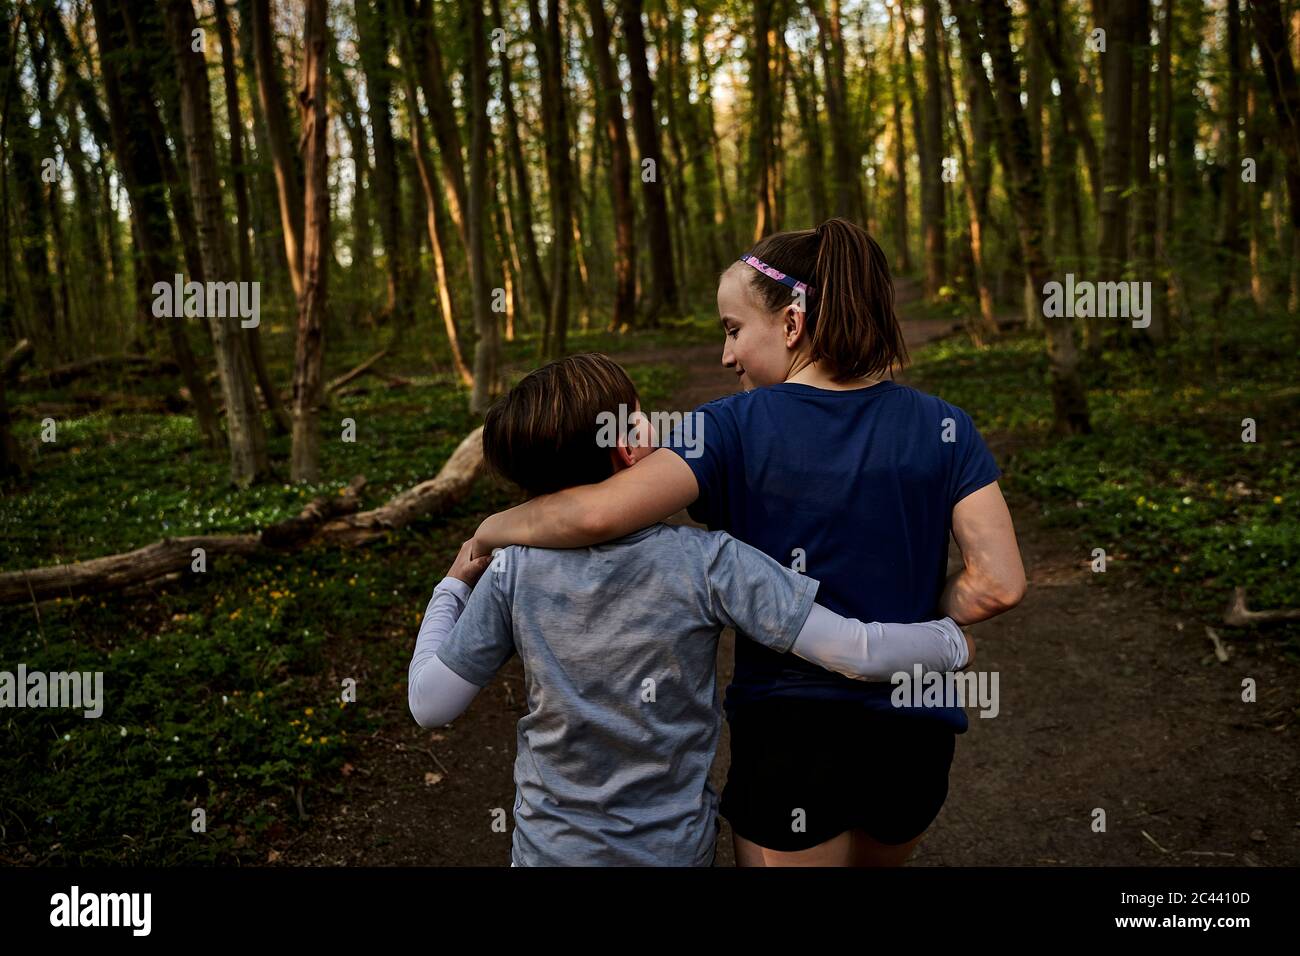 Rear view of sibling walking with arm around in forest Stock Photo